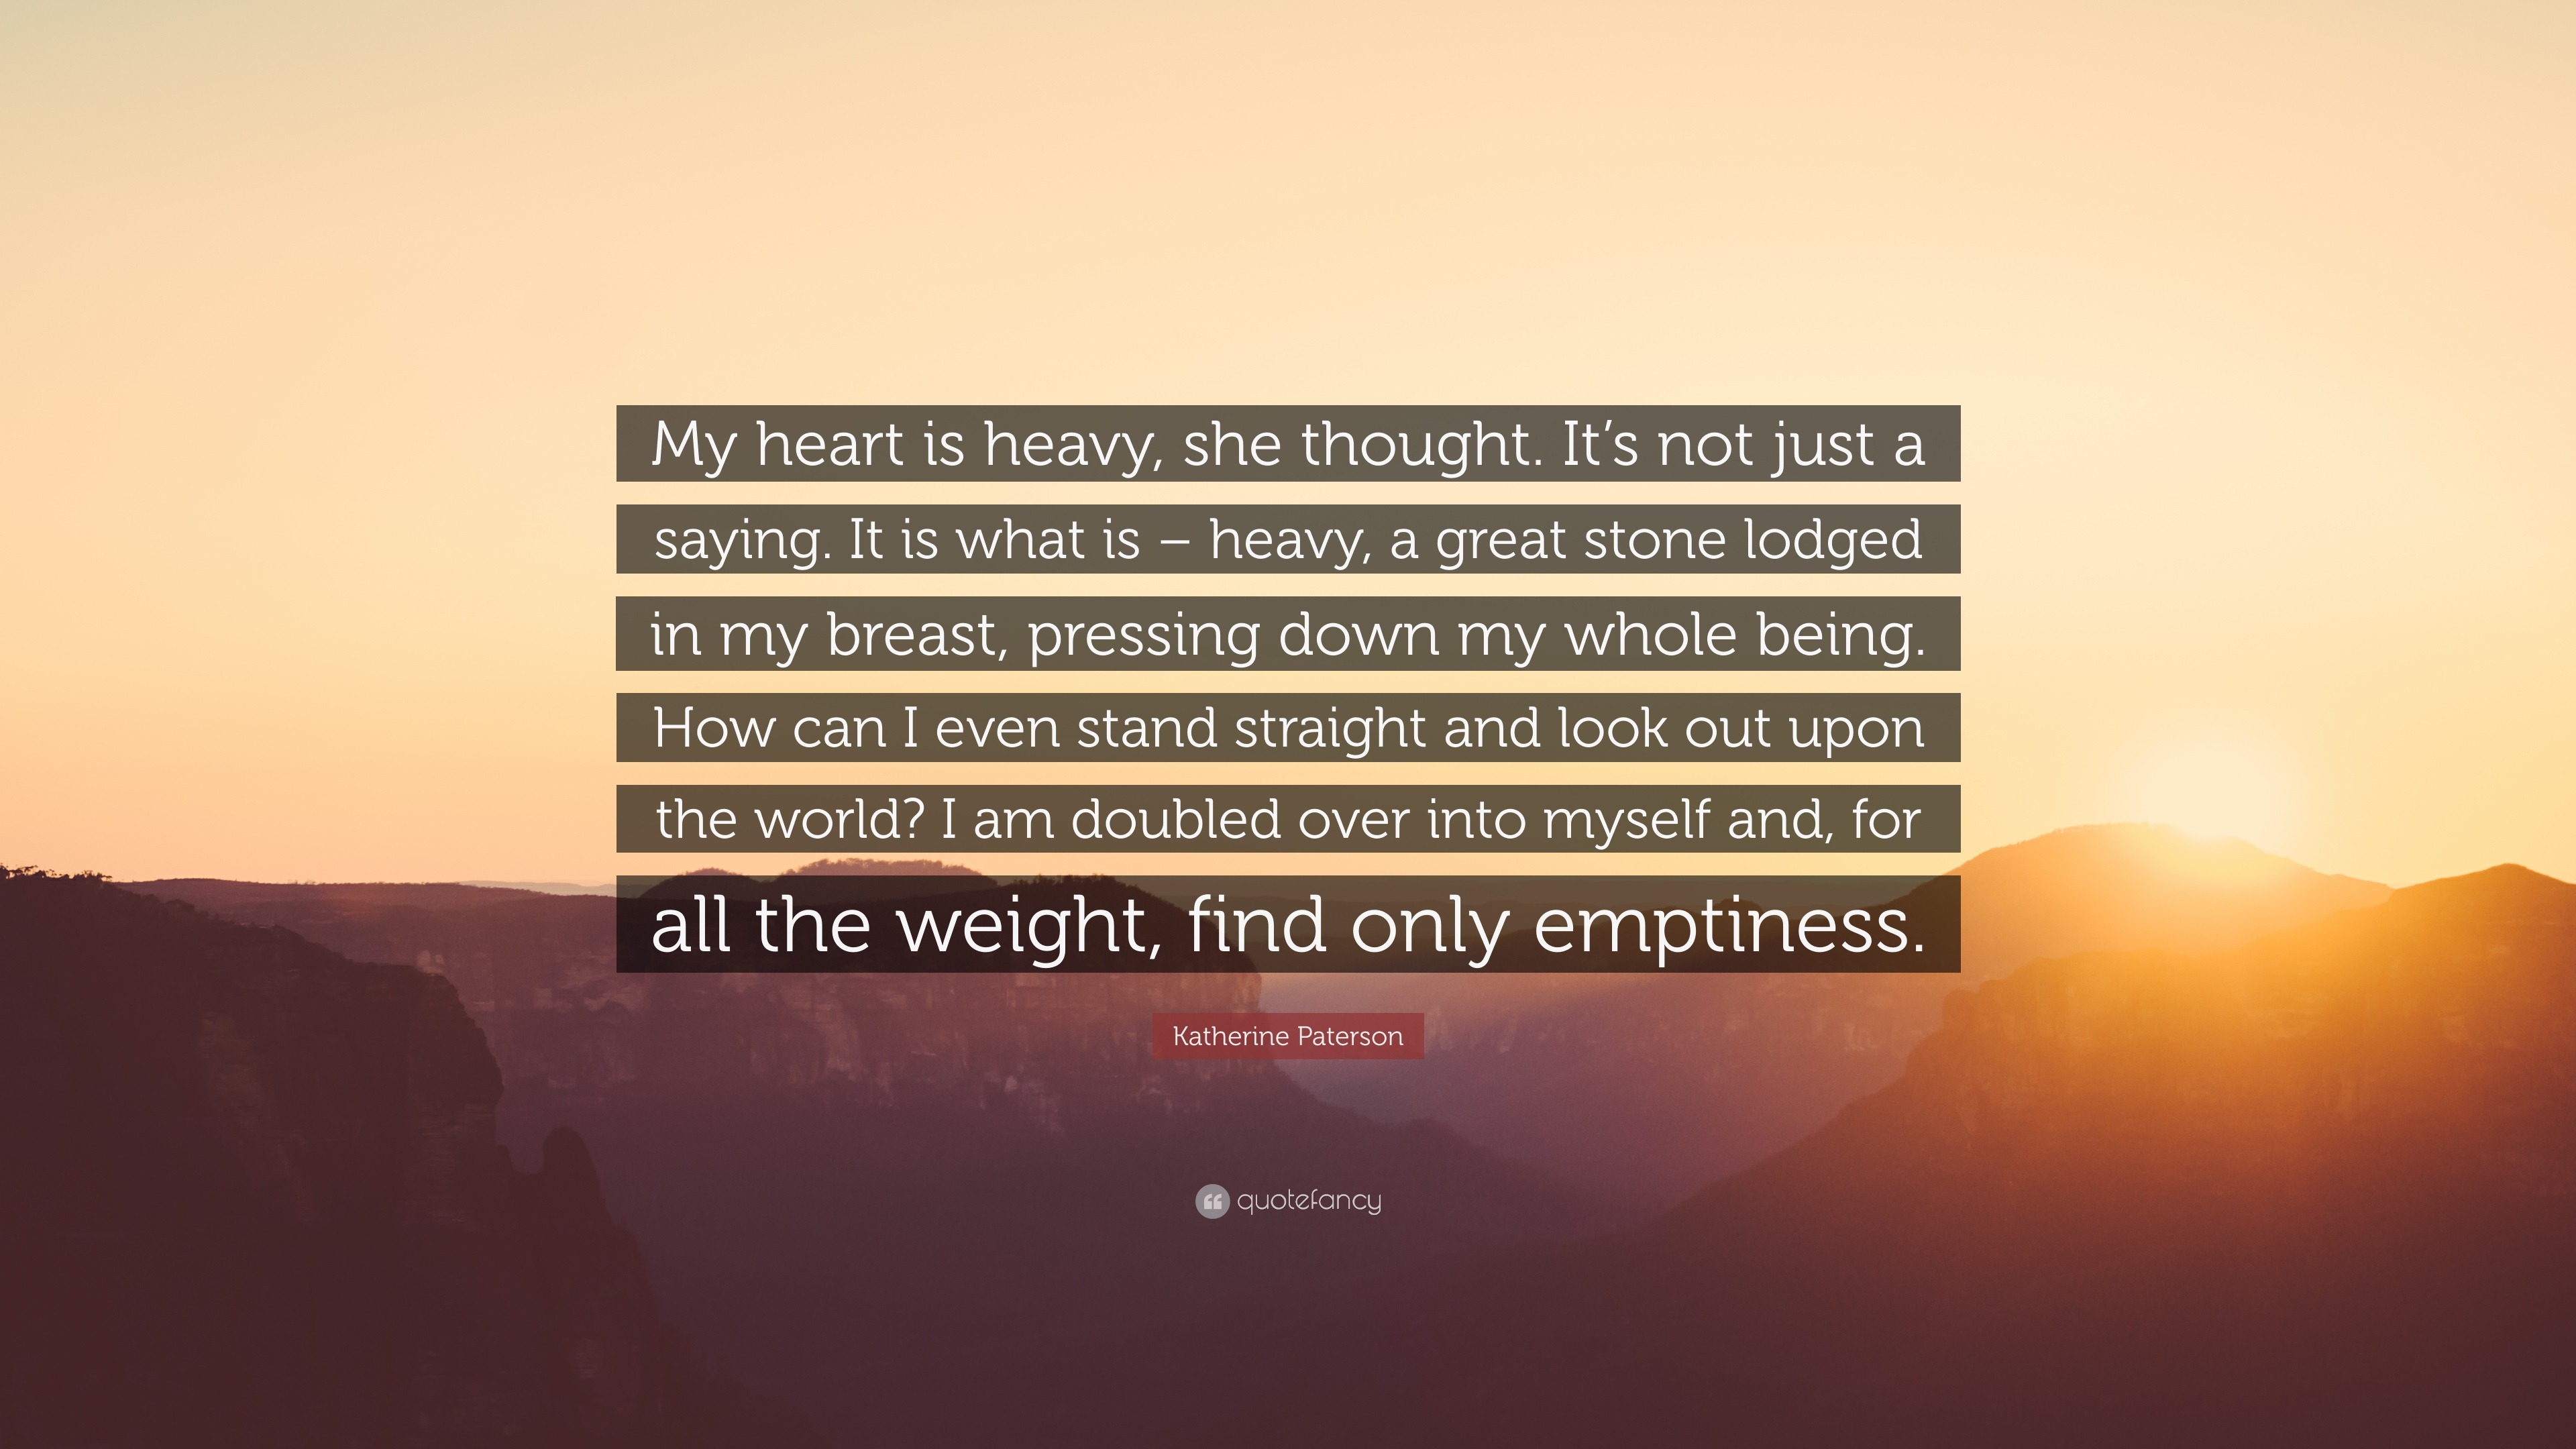 Katherine Paterson Quote My Heart Is Heavy She Thought It S Not Just A Saying It Is What Is Heavy A Great Stone Lodged In My Breast Pressi 7 Wallpapers Quotefancy